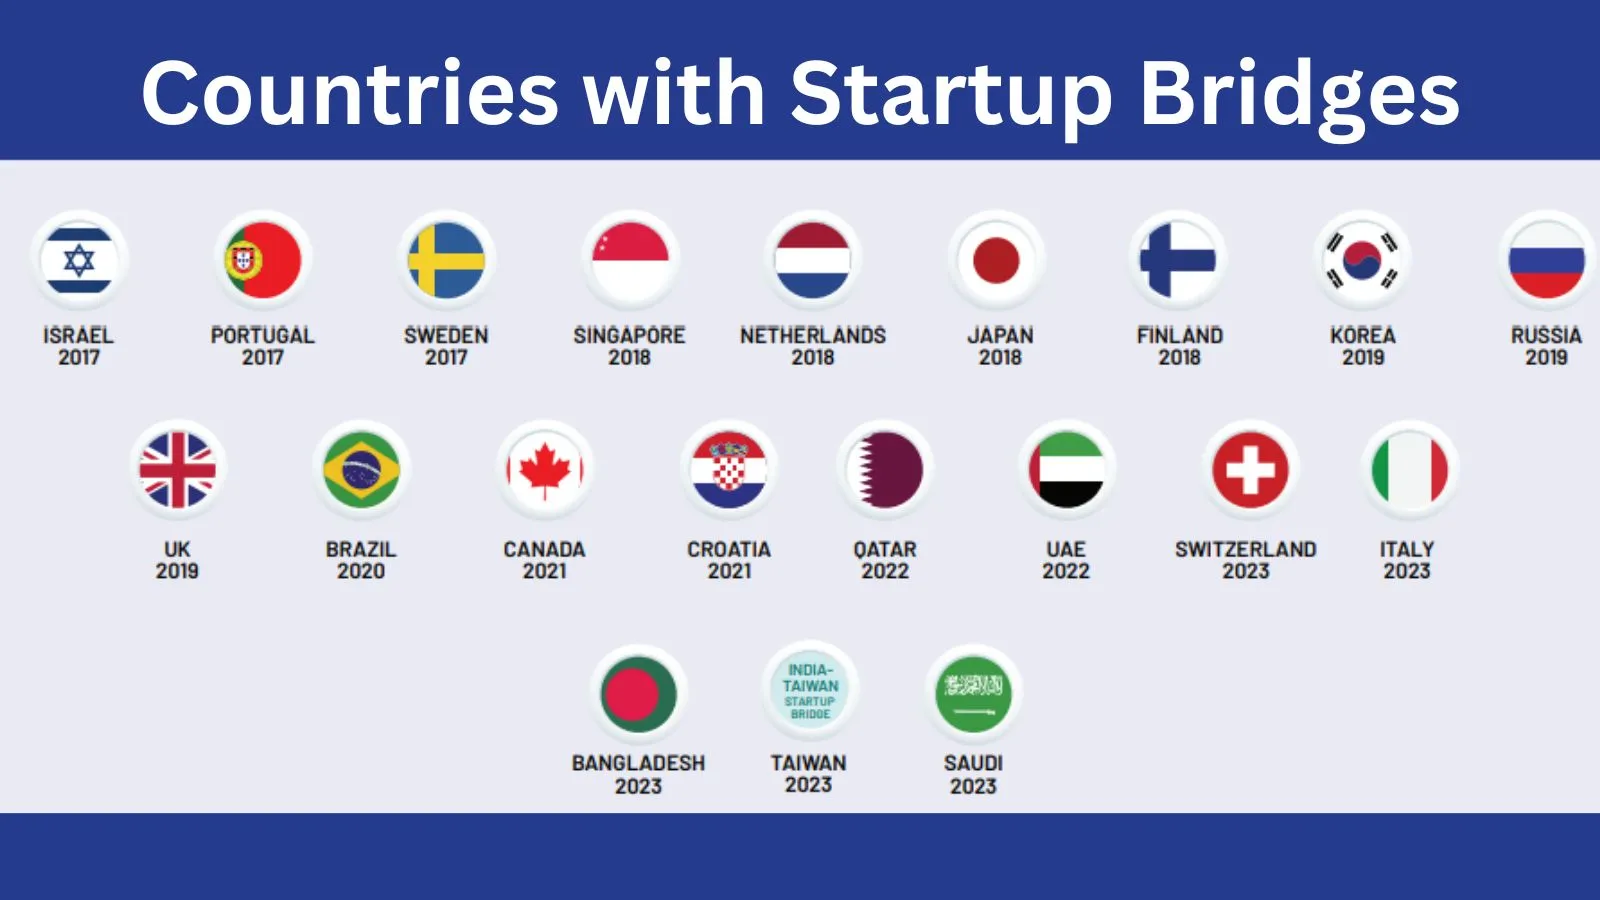 Countries with Startup Bridges